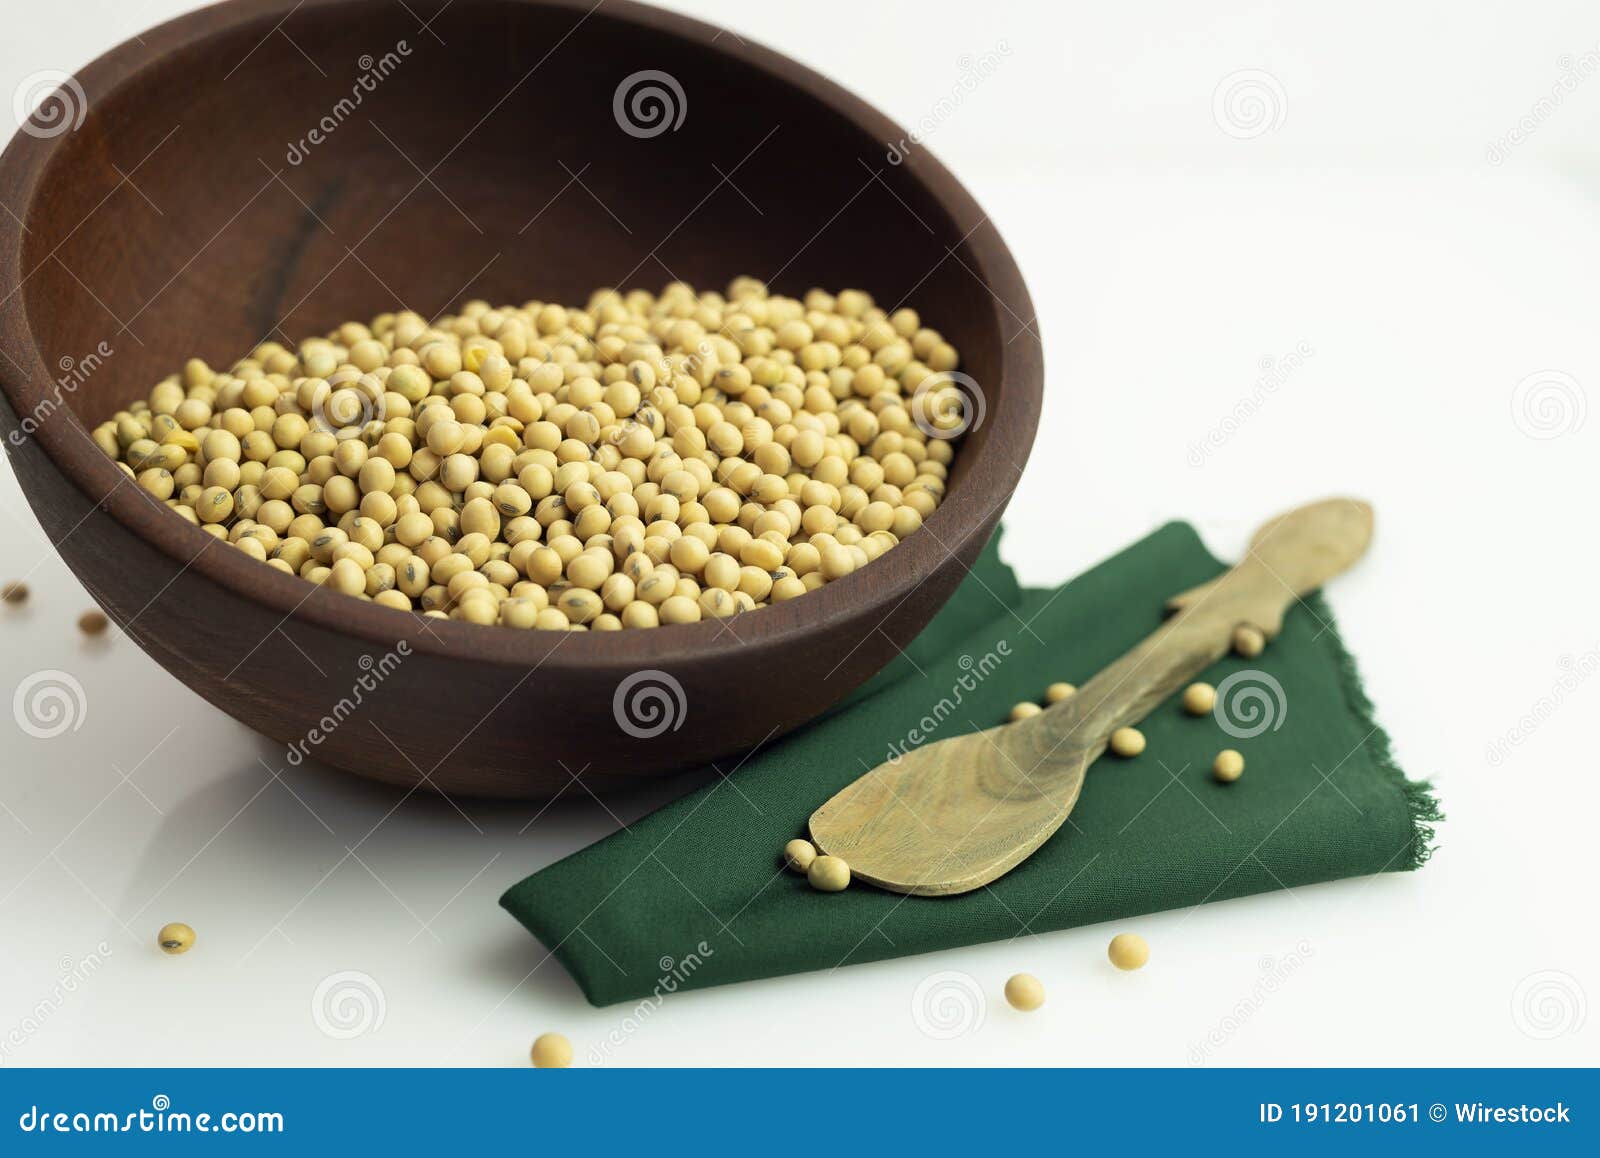 soy beans in wooden bowl